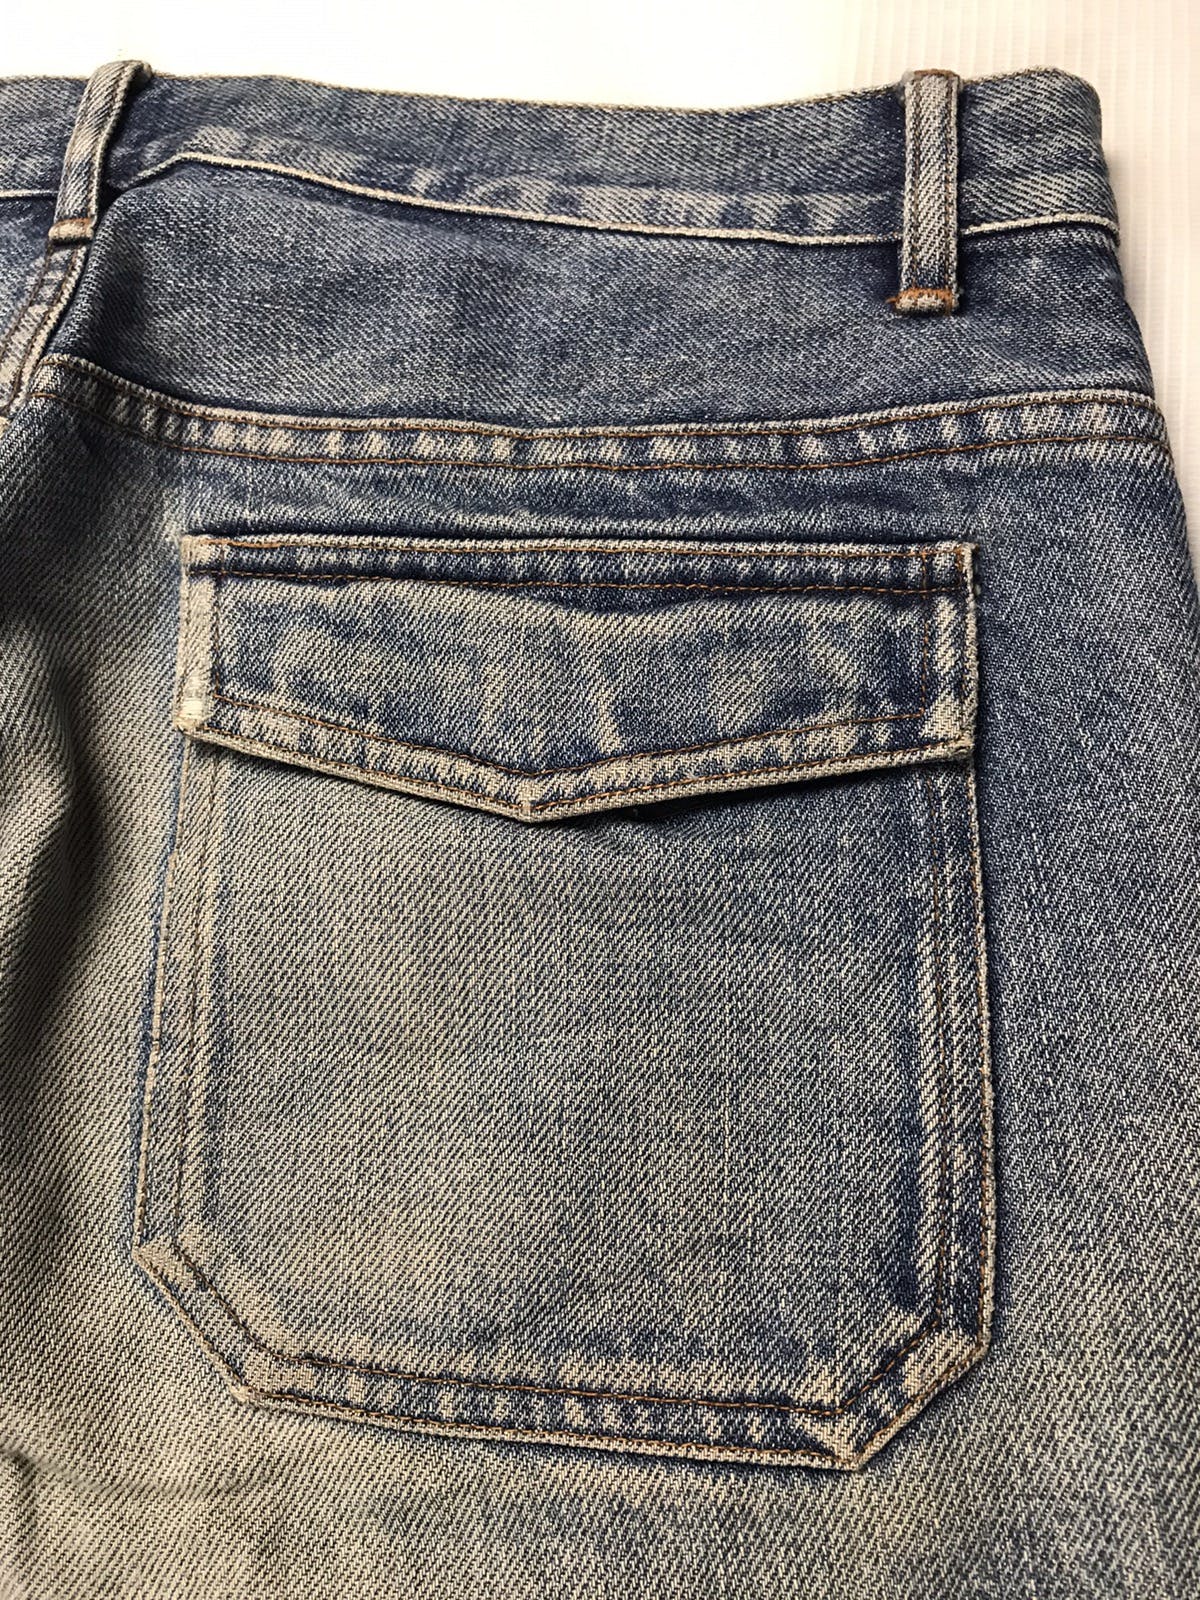 Rare!! A.P.C patch pocket distressed denim Made in Japan - 14